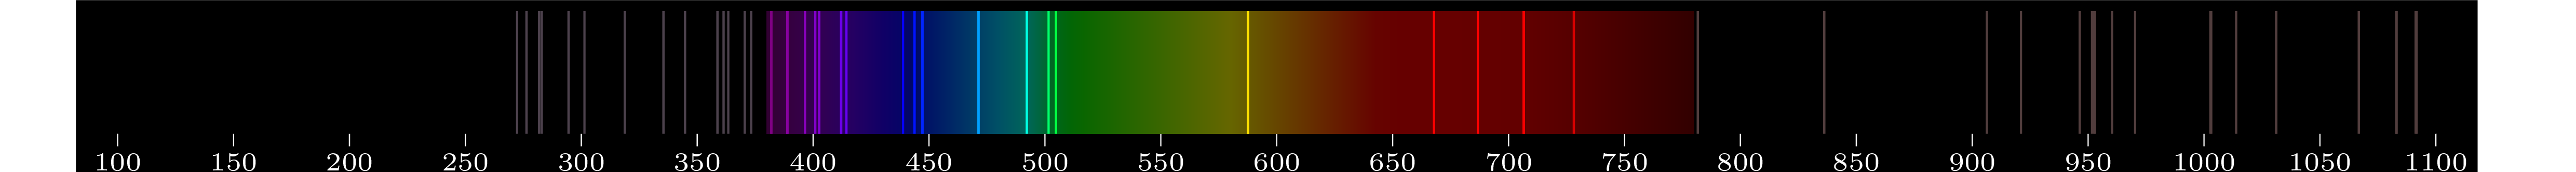 emmision spectra of element He